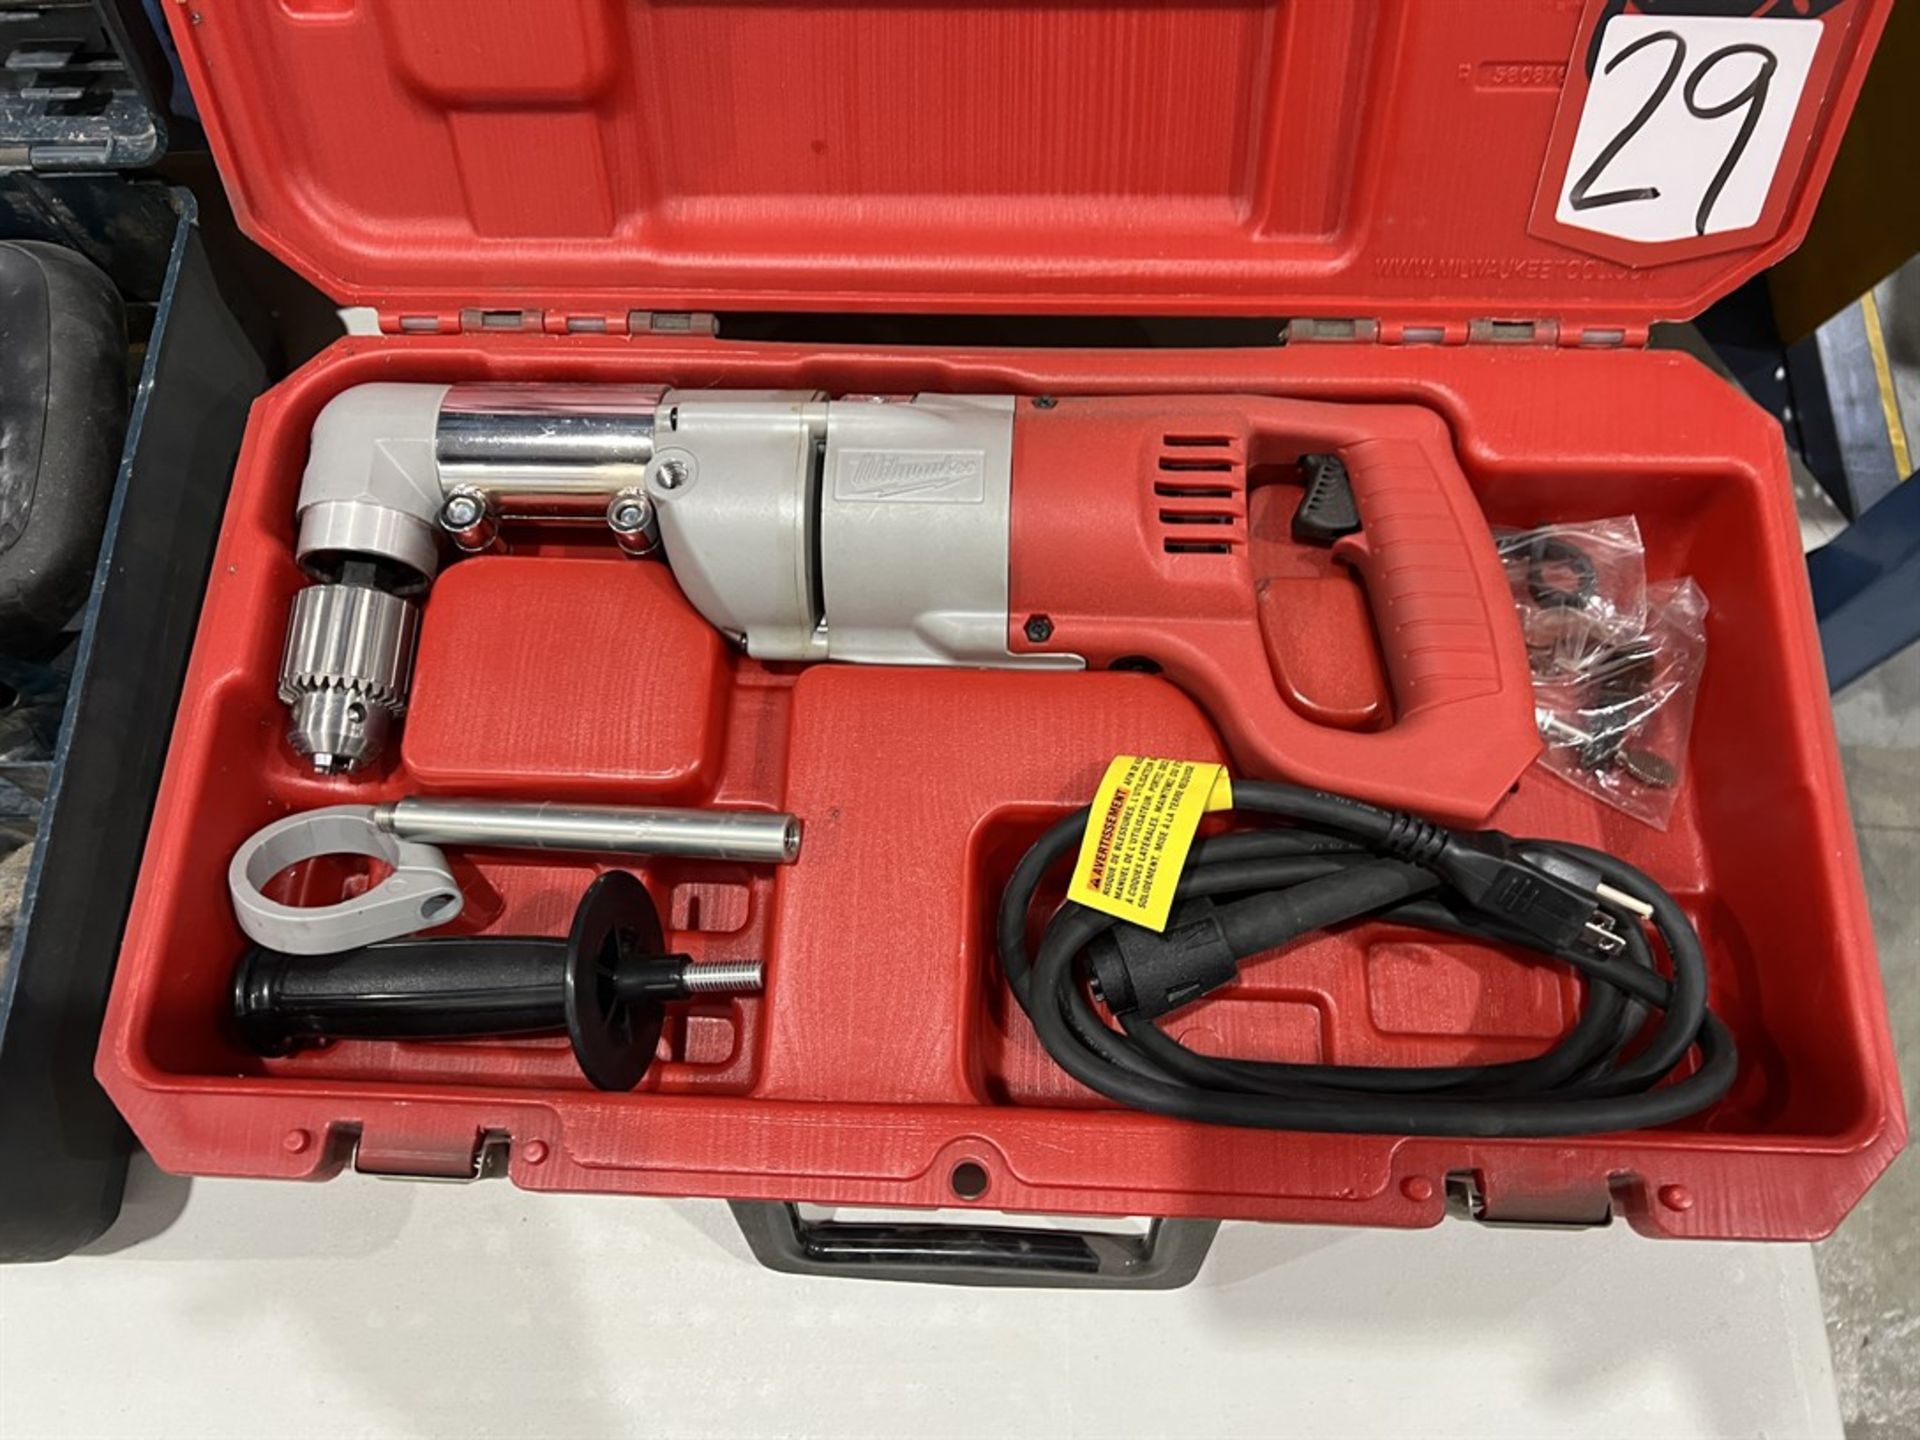 MILWAUKEE 1/2" Drill w/ Two-Speed Right Head - Image 2 of 3